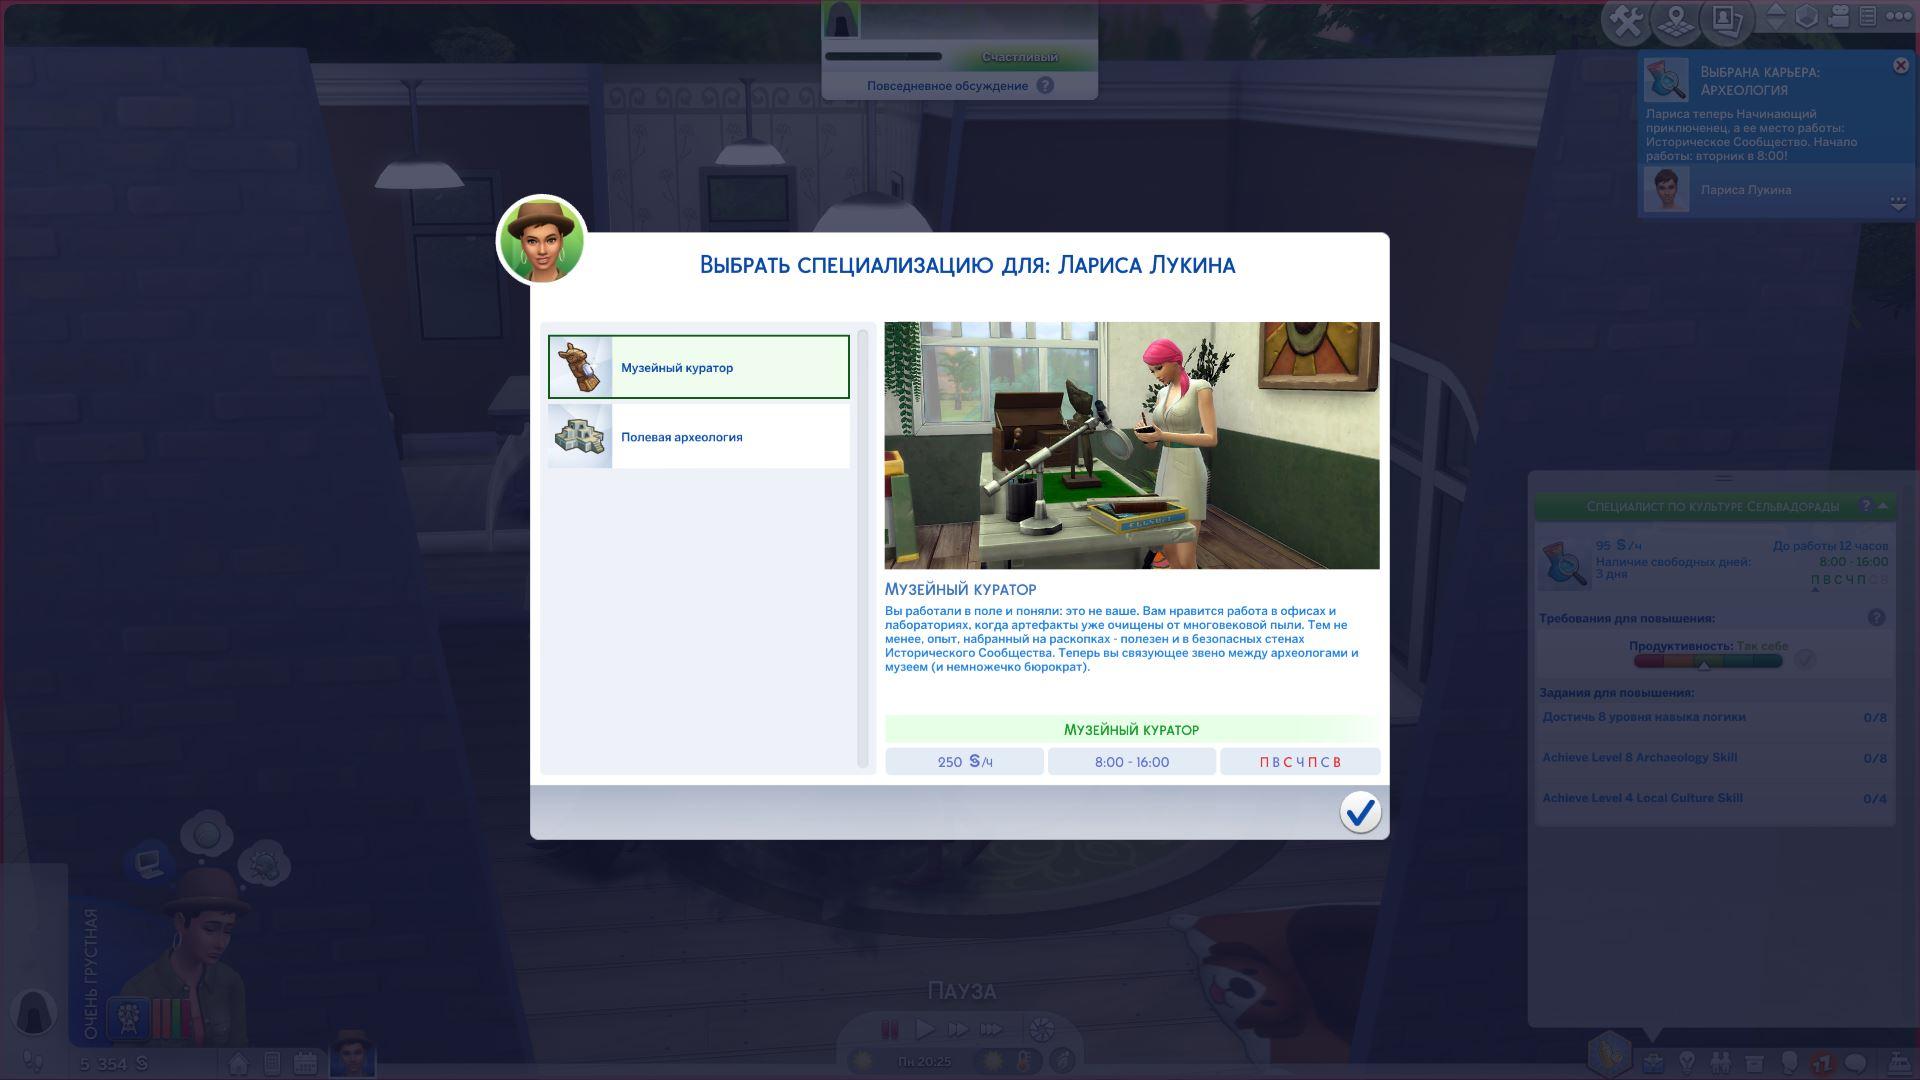 Whickedwhims русификатор. Вуху (wickedwhims). SIMS 4 мод wickedwhims. Мод симс 4 Wicked whims. Сборка анимация для wickedwhims.